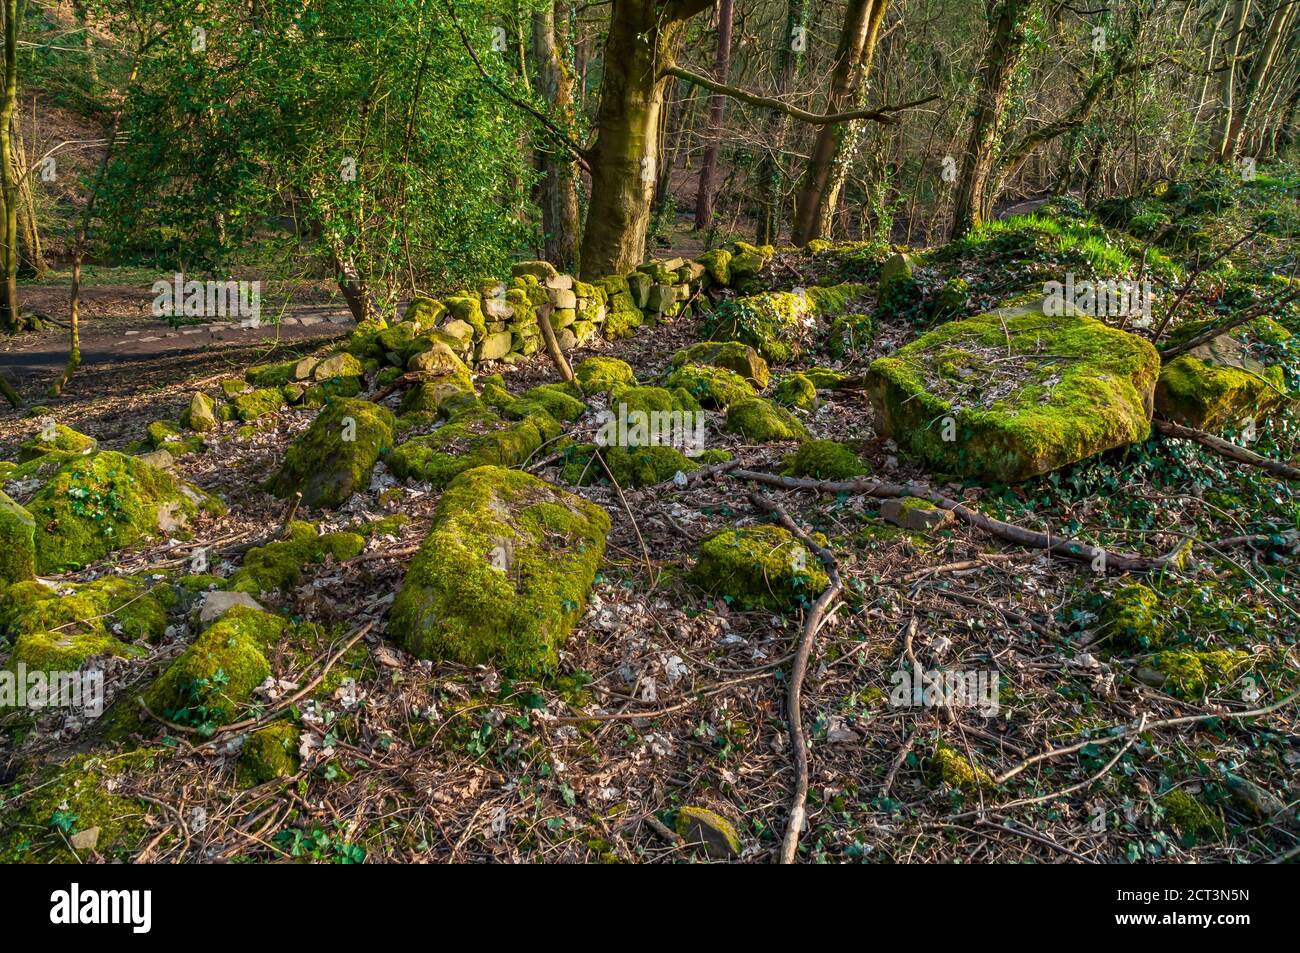 Several large gritstone boulders and a ruined old wall at Ryecroft Glen in Ecclesall Woods, ancient woodland in Sheffield. Stock Photo